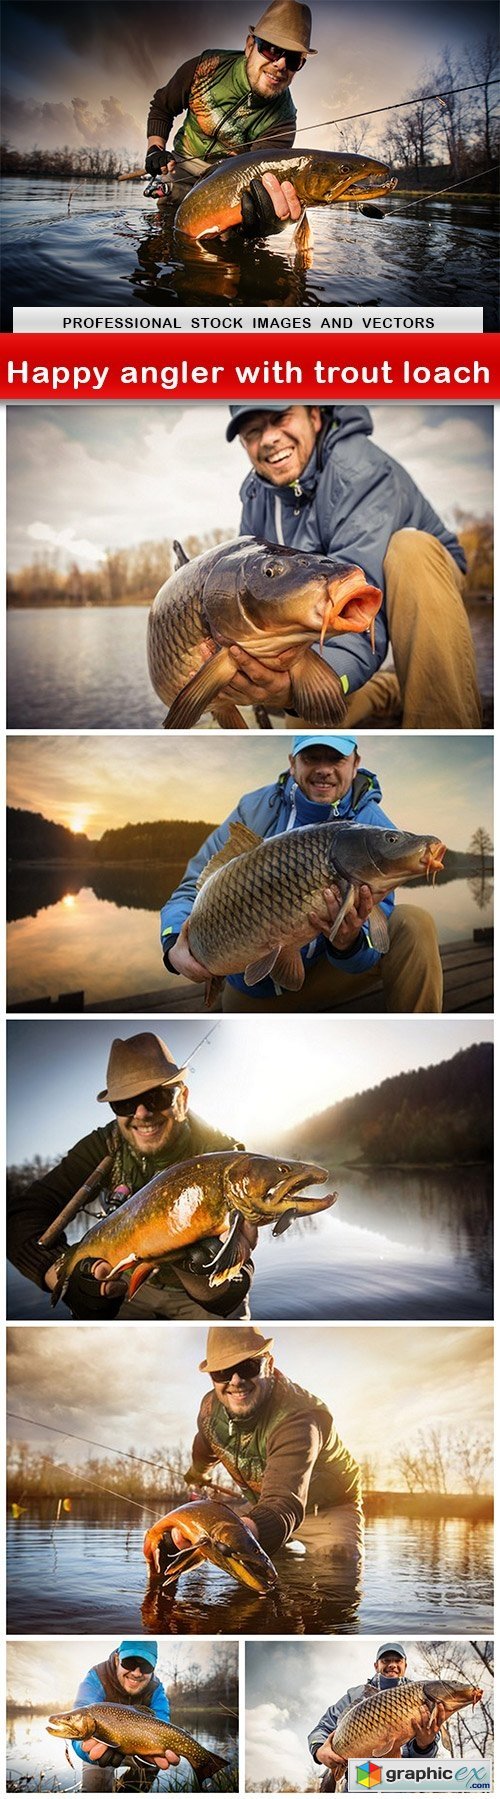 Happy angler with trout loach - 7 UHQ JPEG